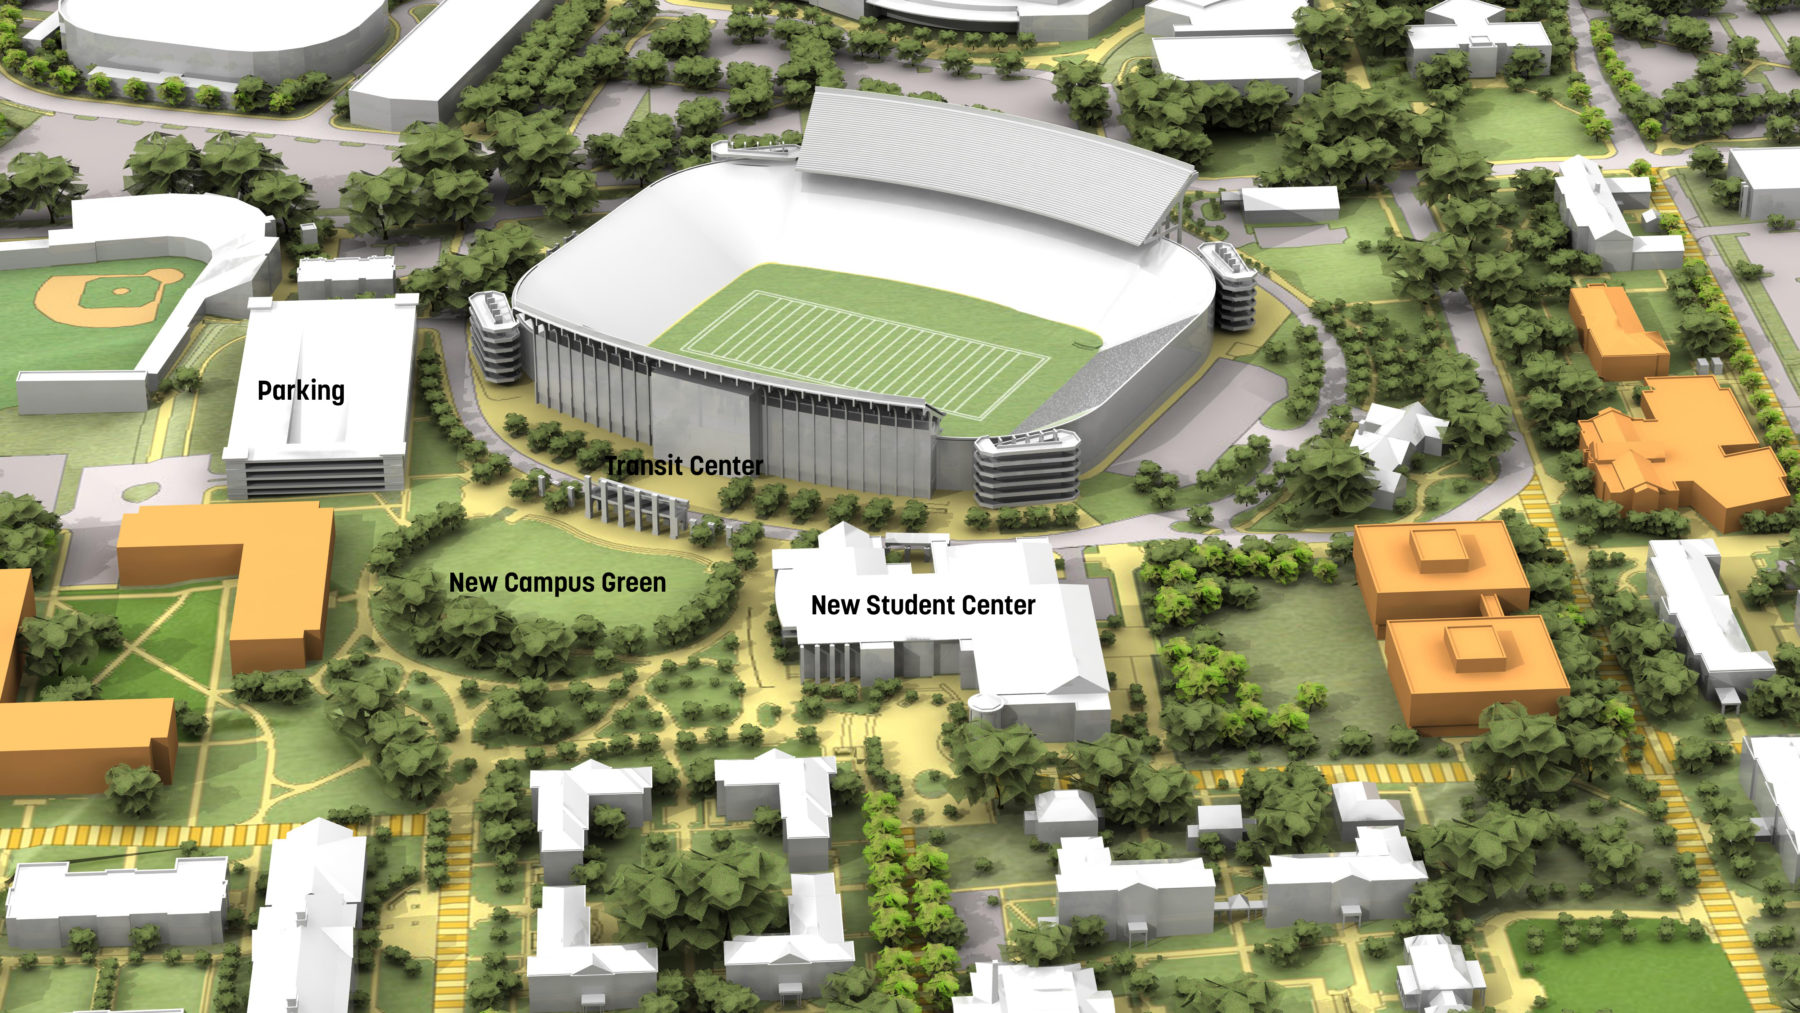 Aerial rendering of University's Campus Green & Student Center